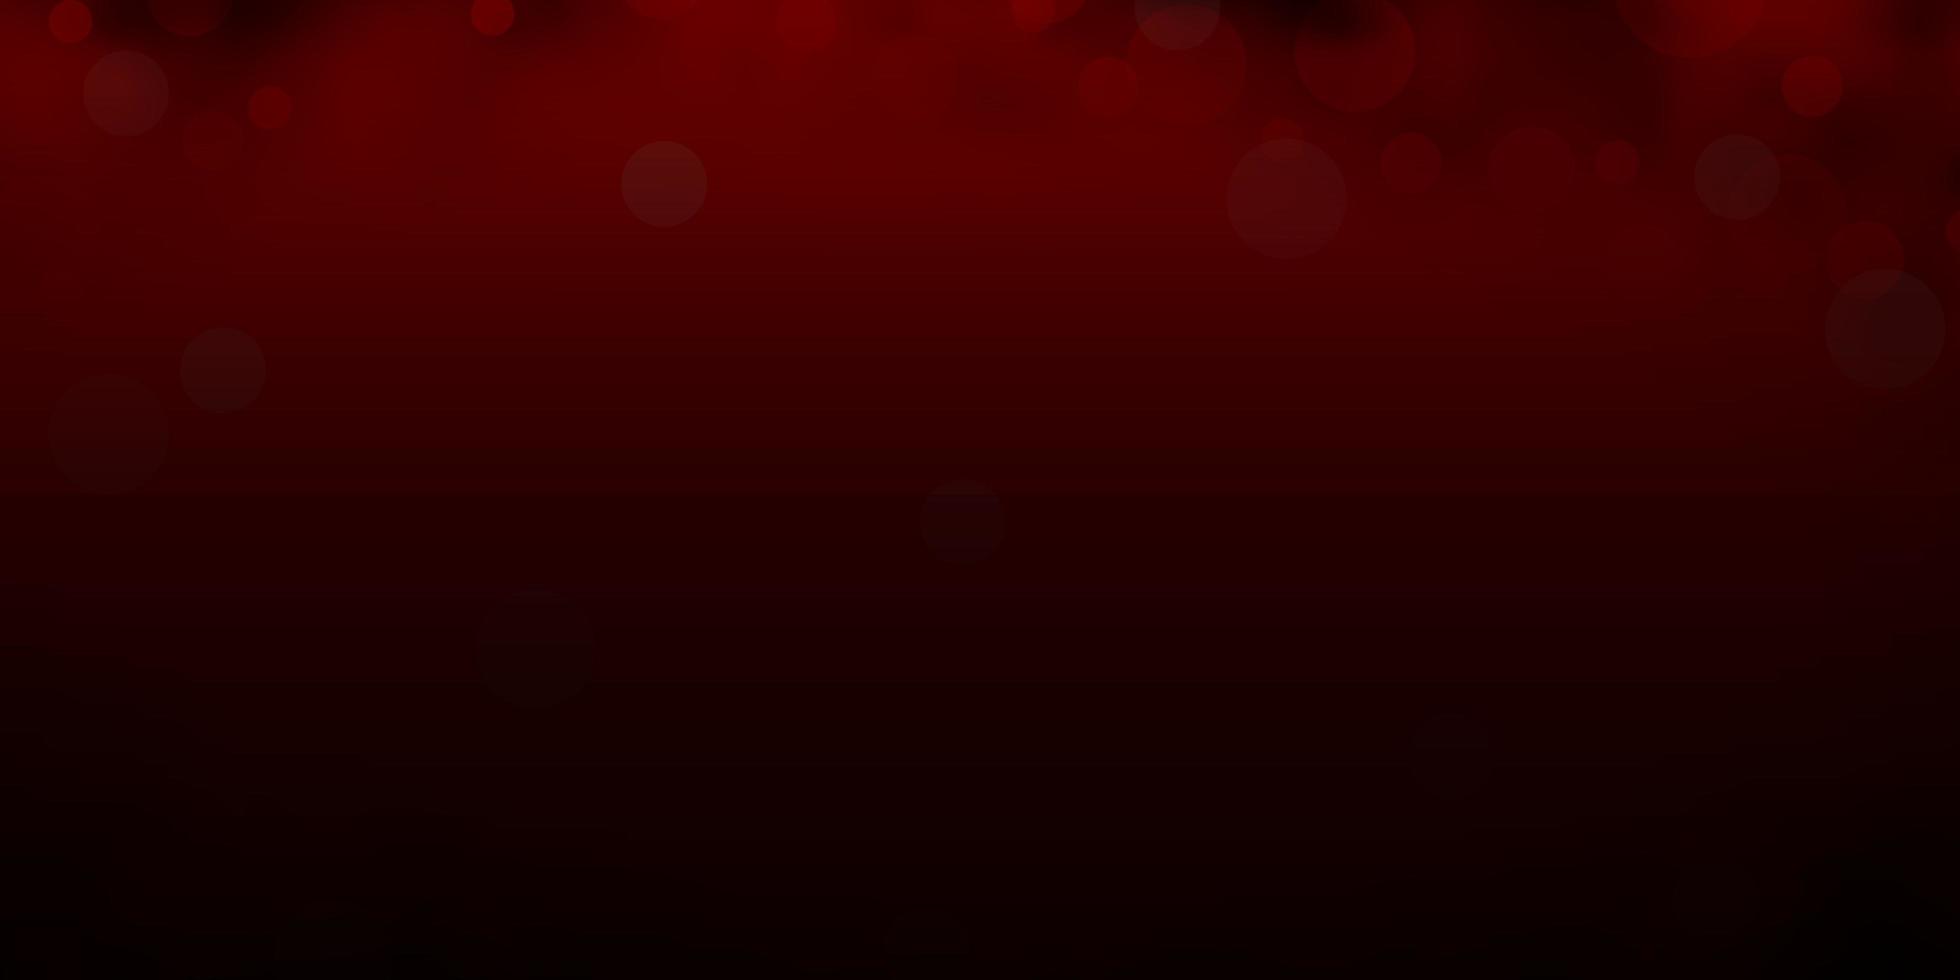 Dark red background with circles. vector